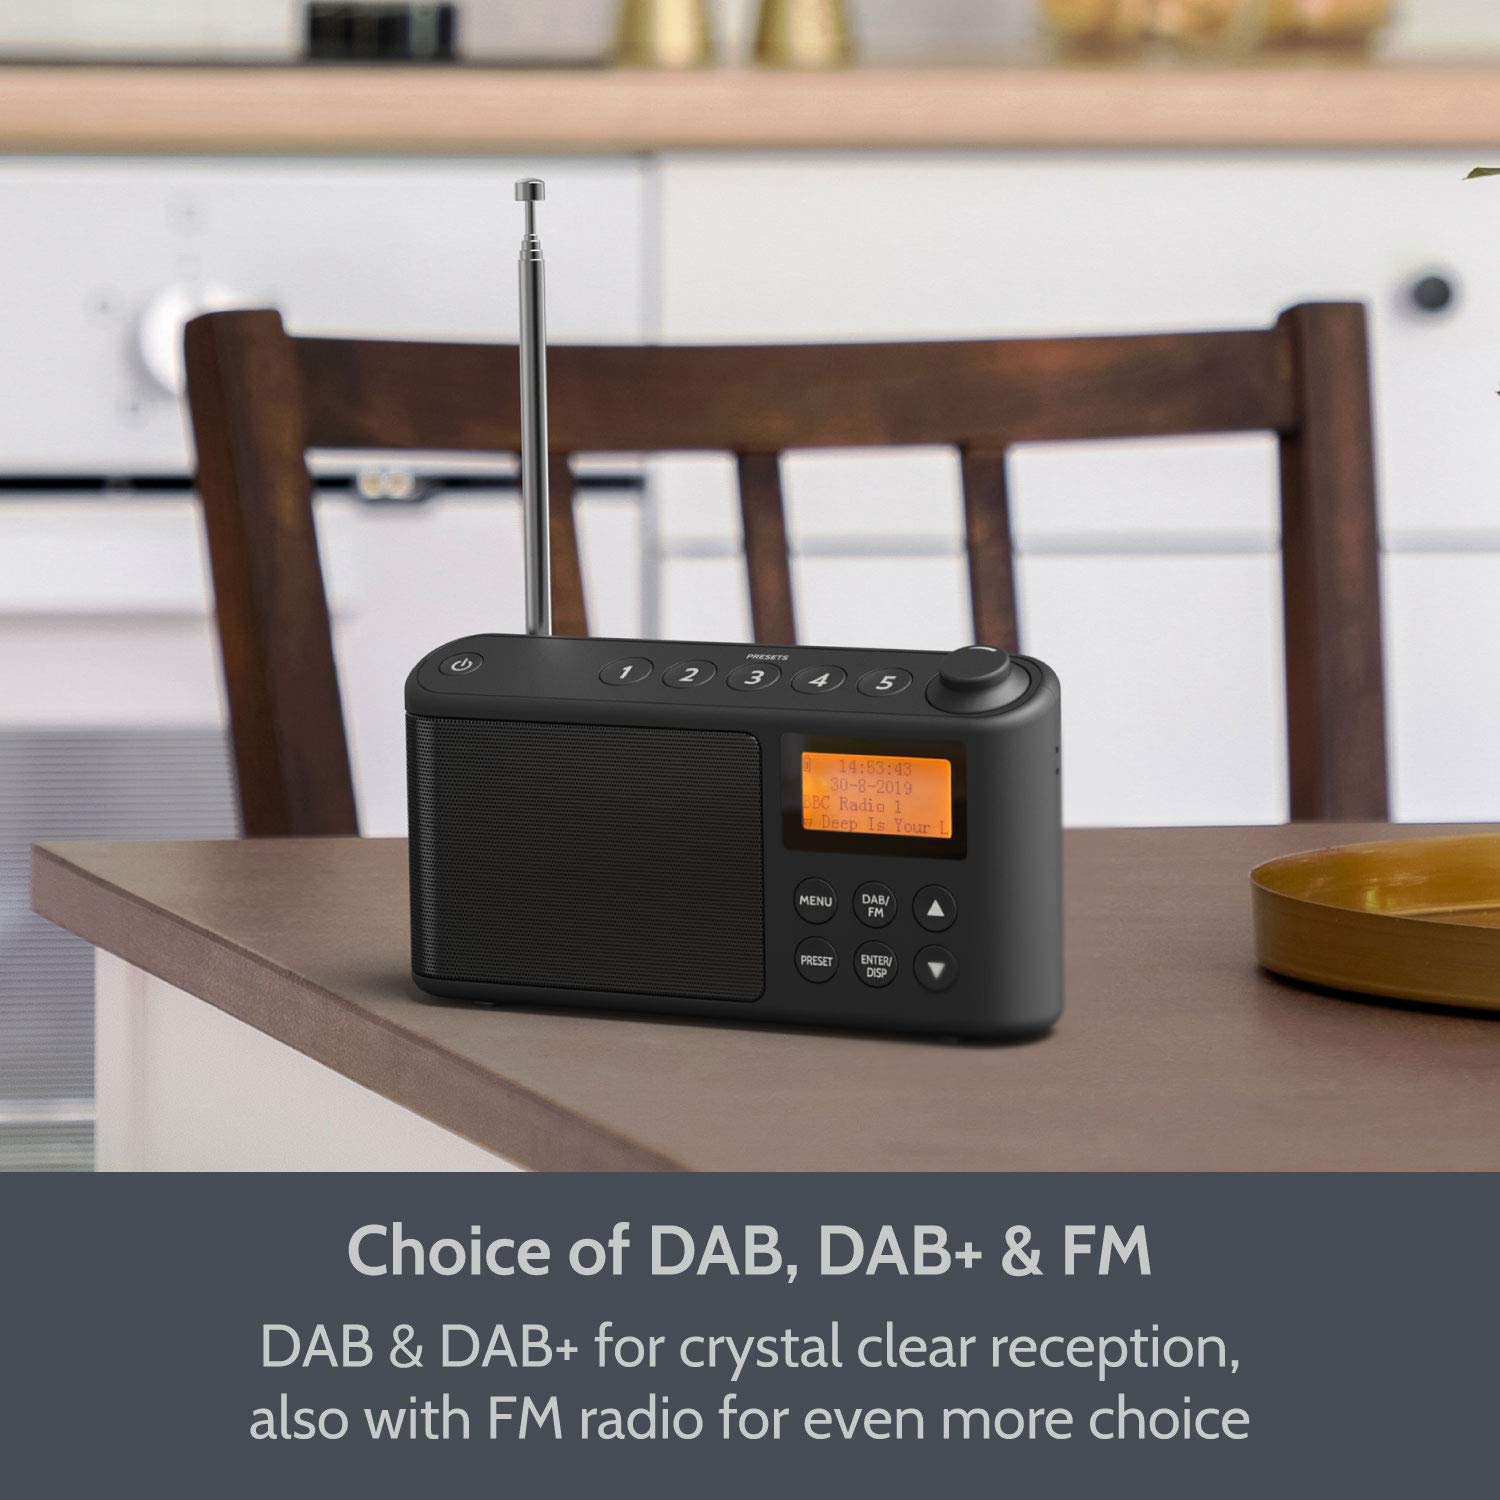 DAB/DAB+ & FM Radio, Mains and Battery Powered Portable DAB Radios Rechargeable Digital Radio with USB Charging for 15 Hours Playback (Black)